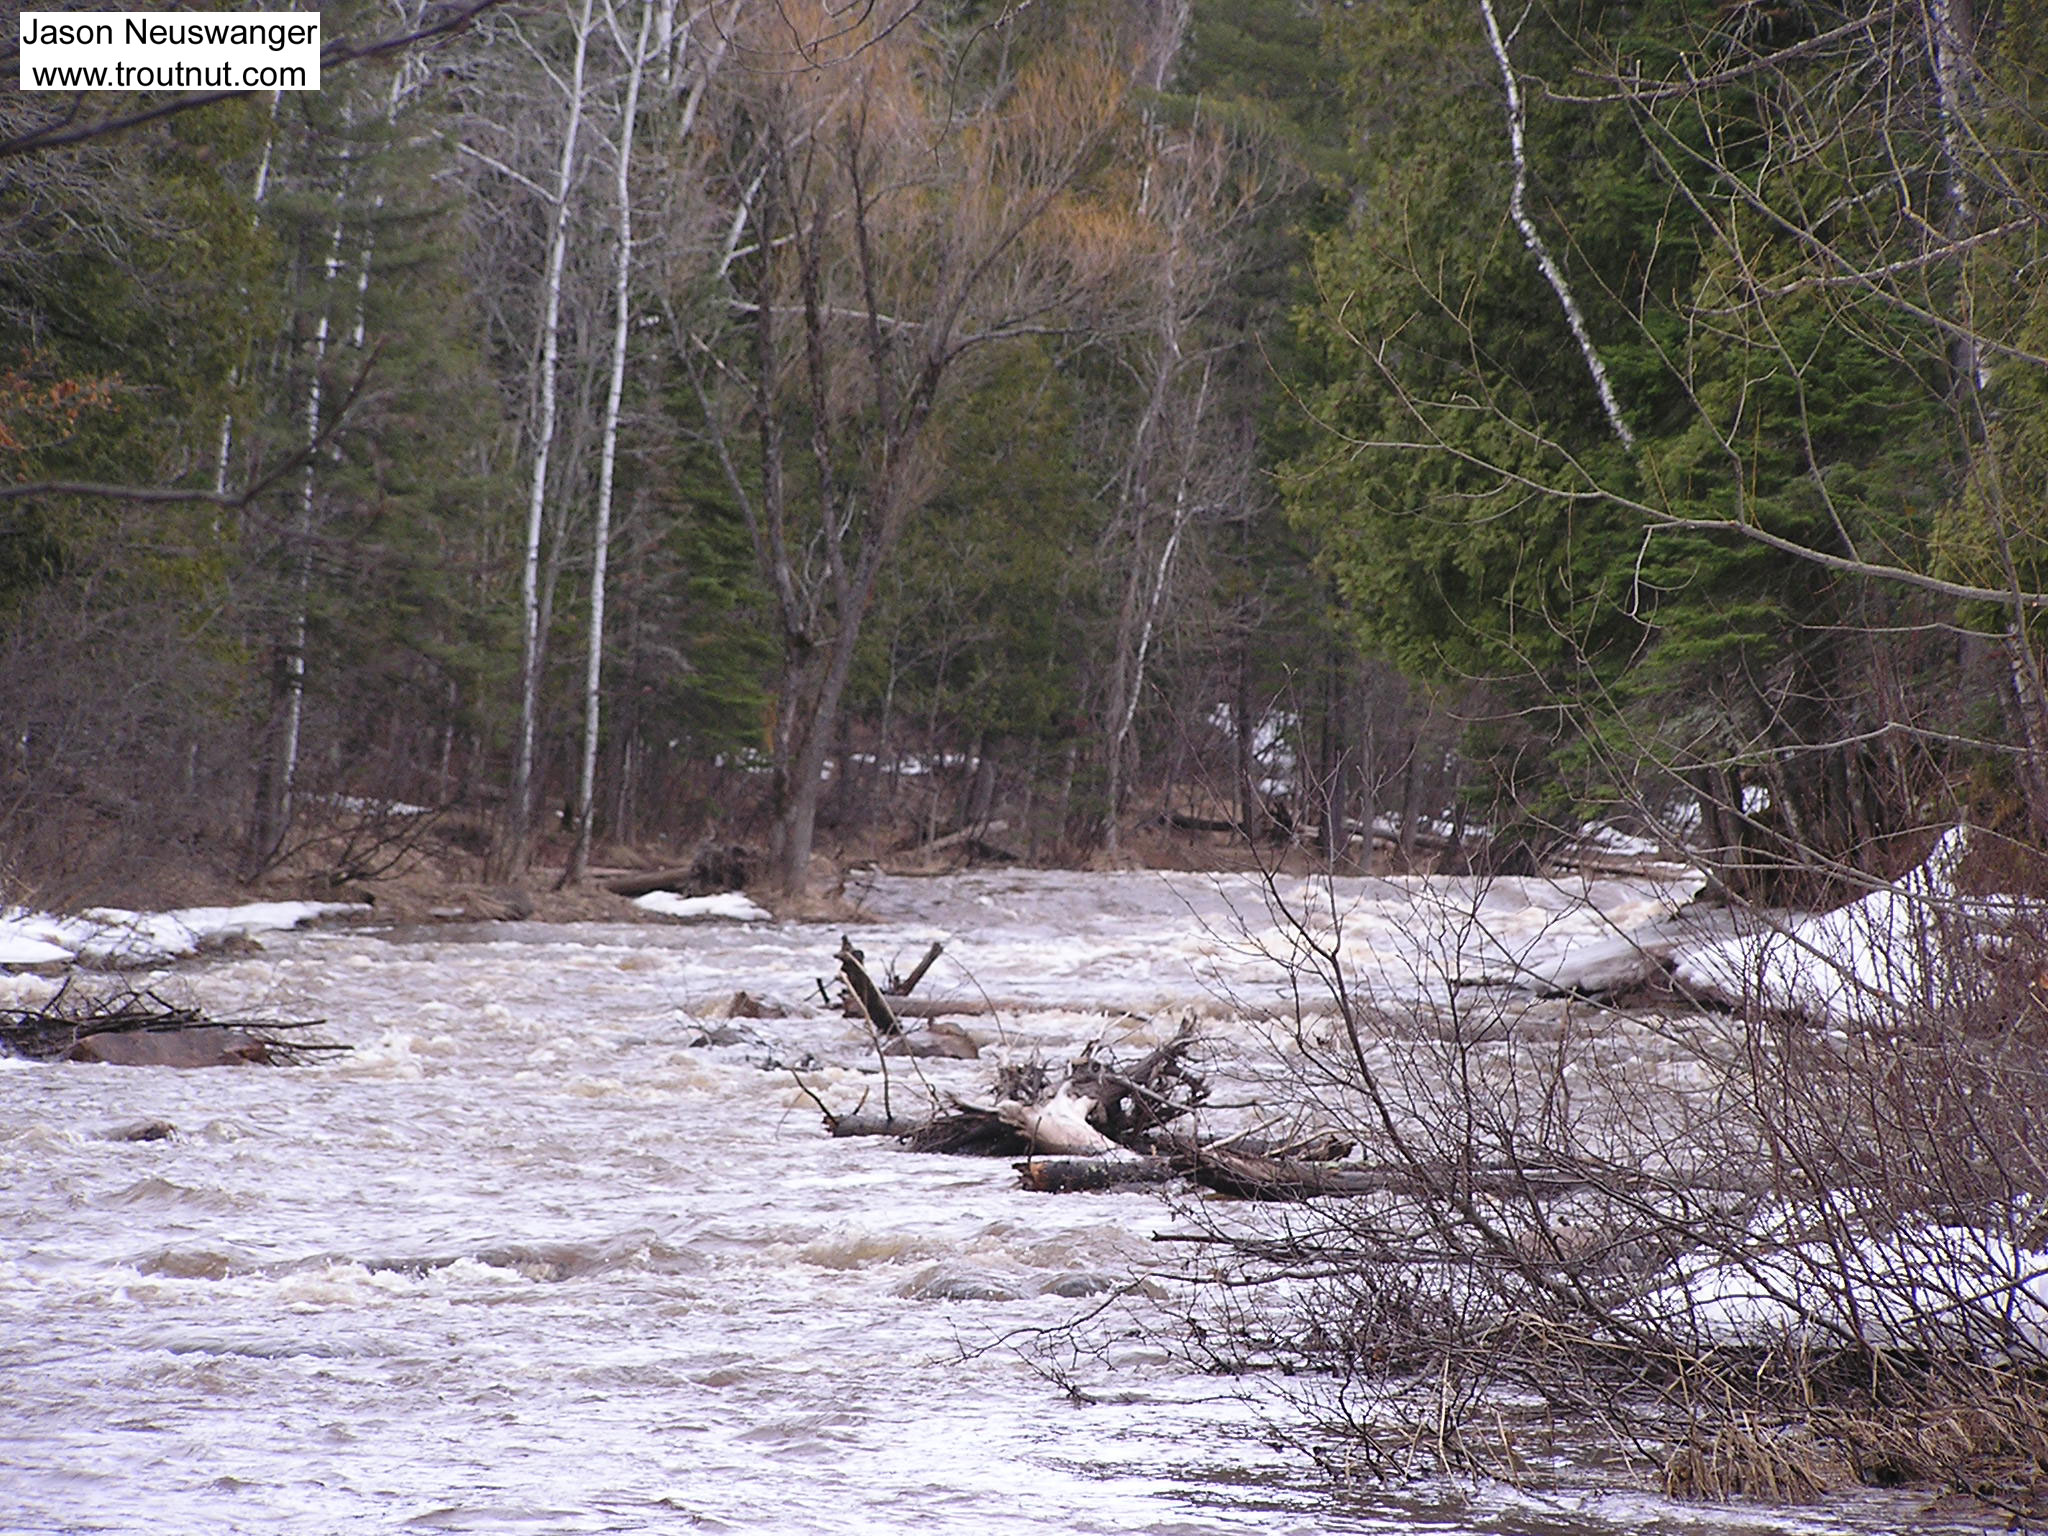 Spring rain has this steelhead river up and roaring. From the Bois Brule River in Wisconsin.